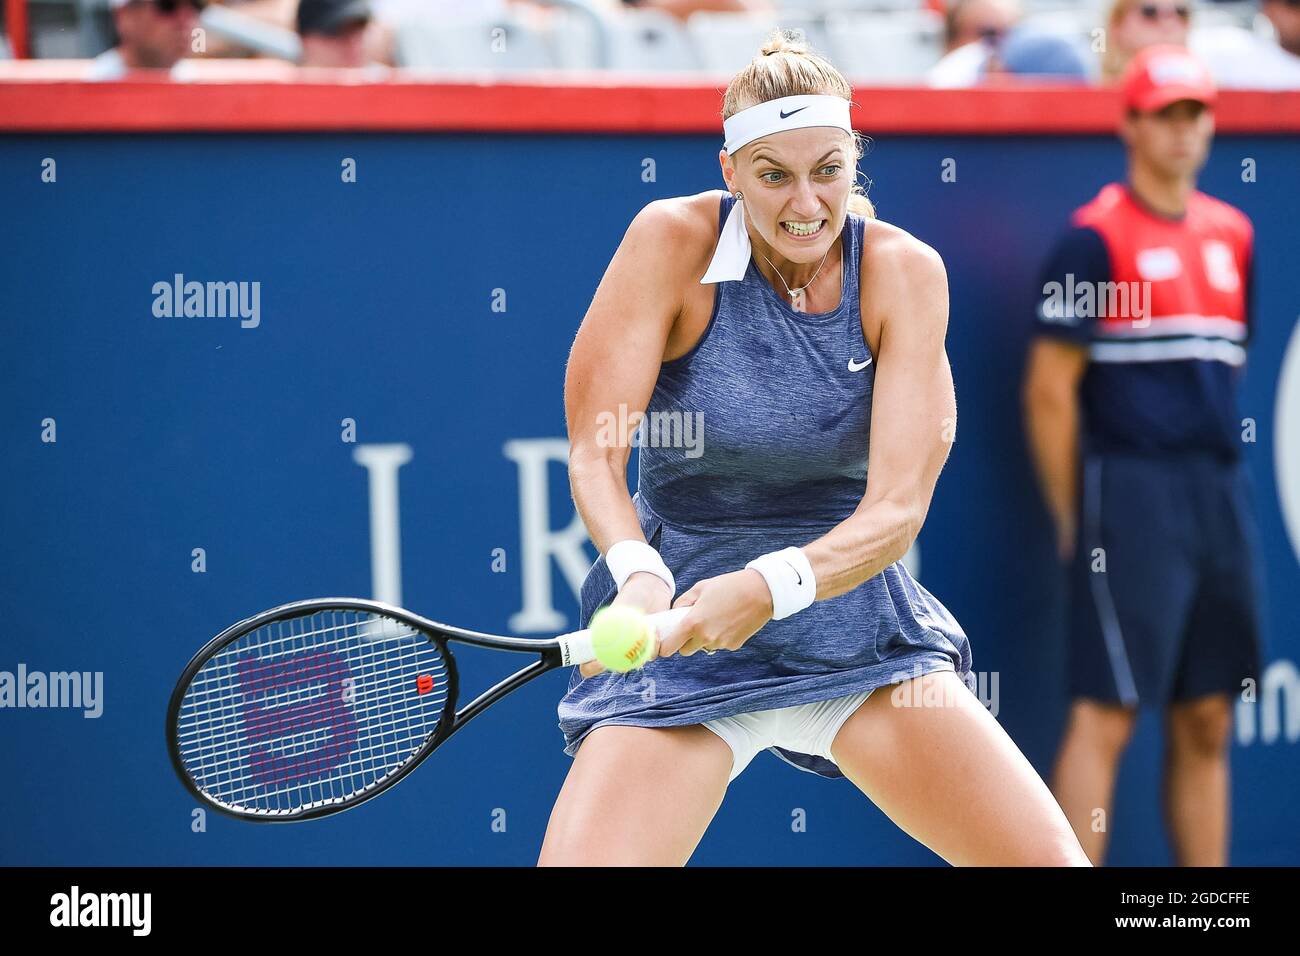 Montreal, Canada. 12th Aug, 2021. August 12, 2021: Petra Kvitova (CZE)  returns the ball during the WTA National Bank Open third round match at IGA  Stadium in Montreal, Quebec. David Kirouac/(Photo by